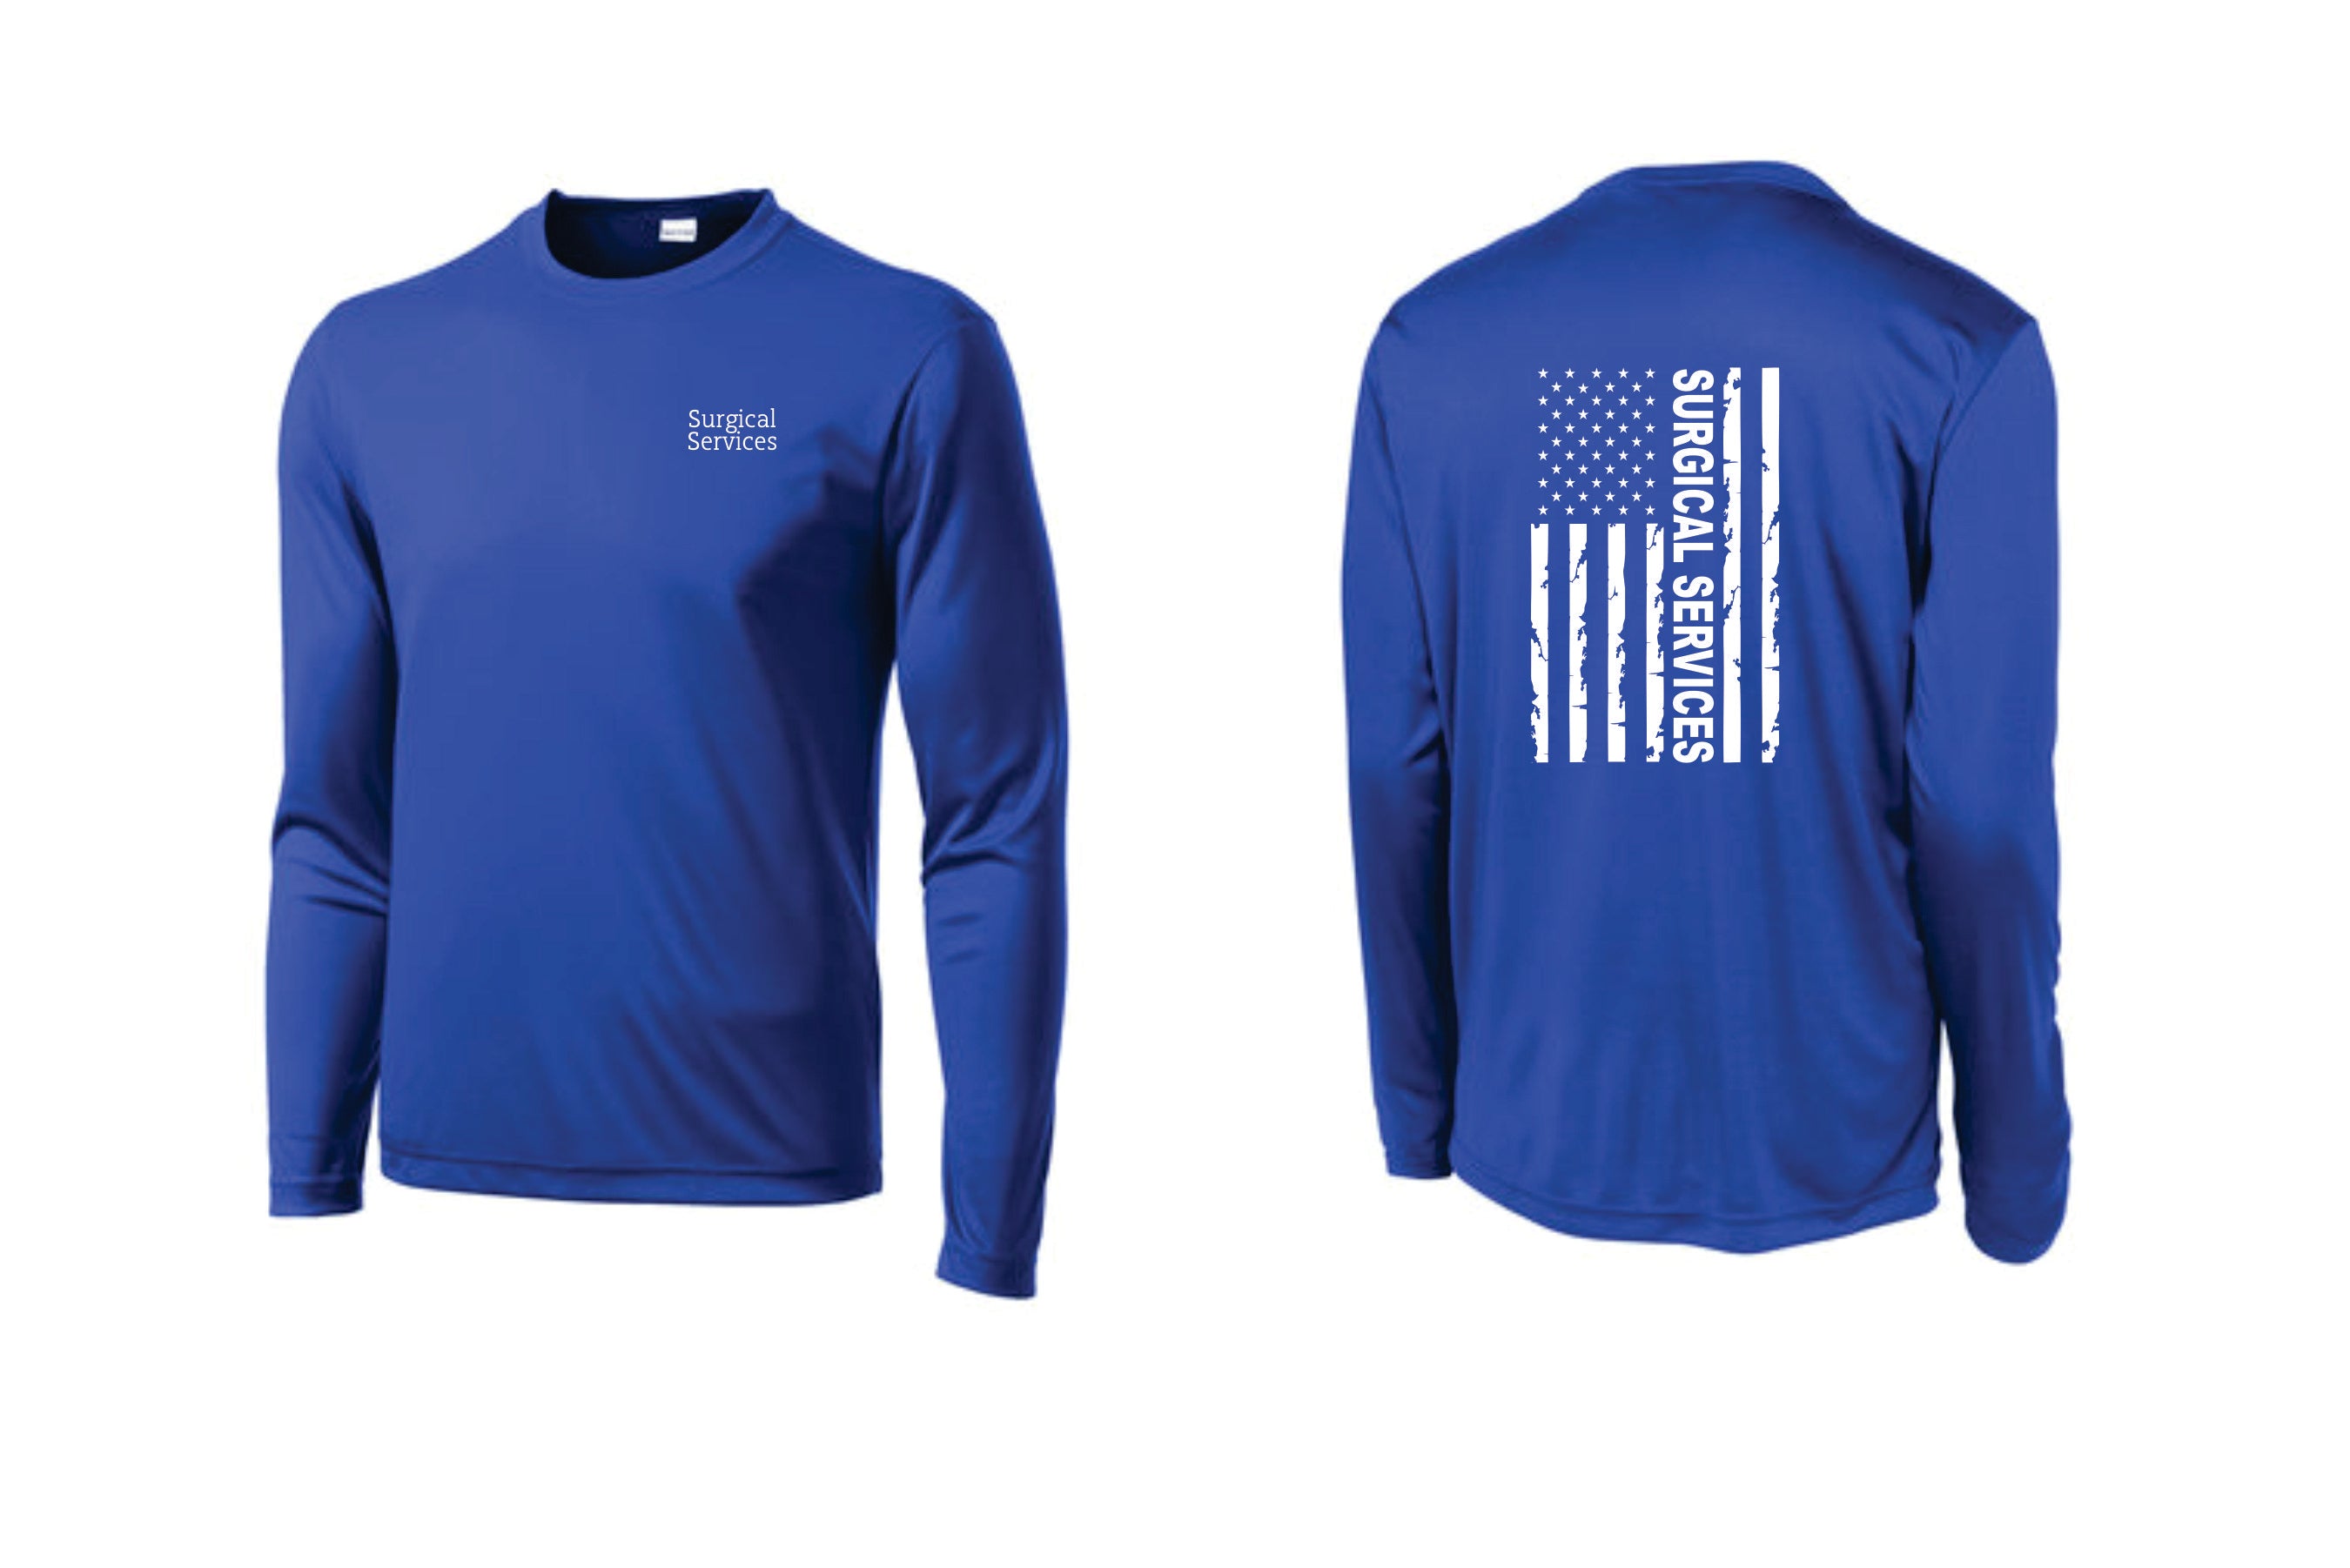 PHW - Surgical Services Flag - Dri-Fit Long Sleeve